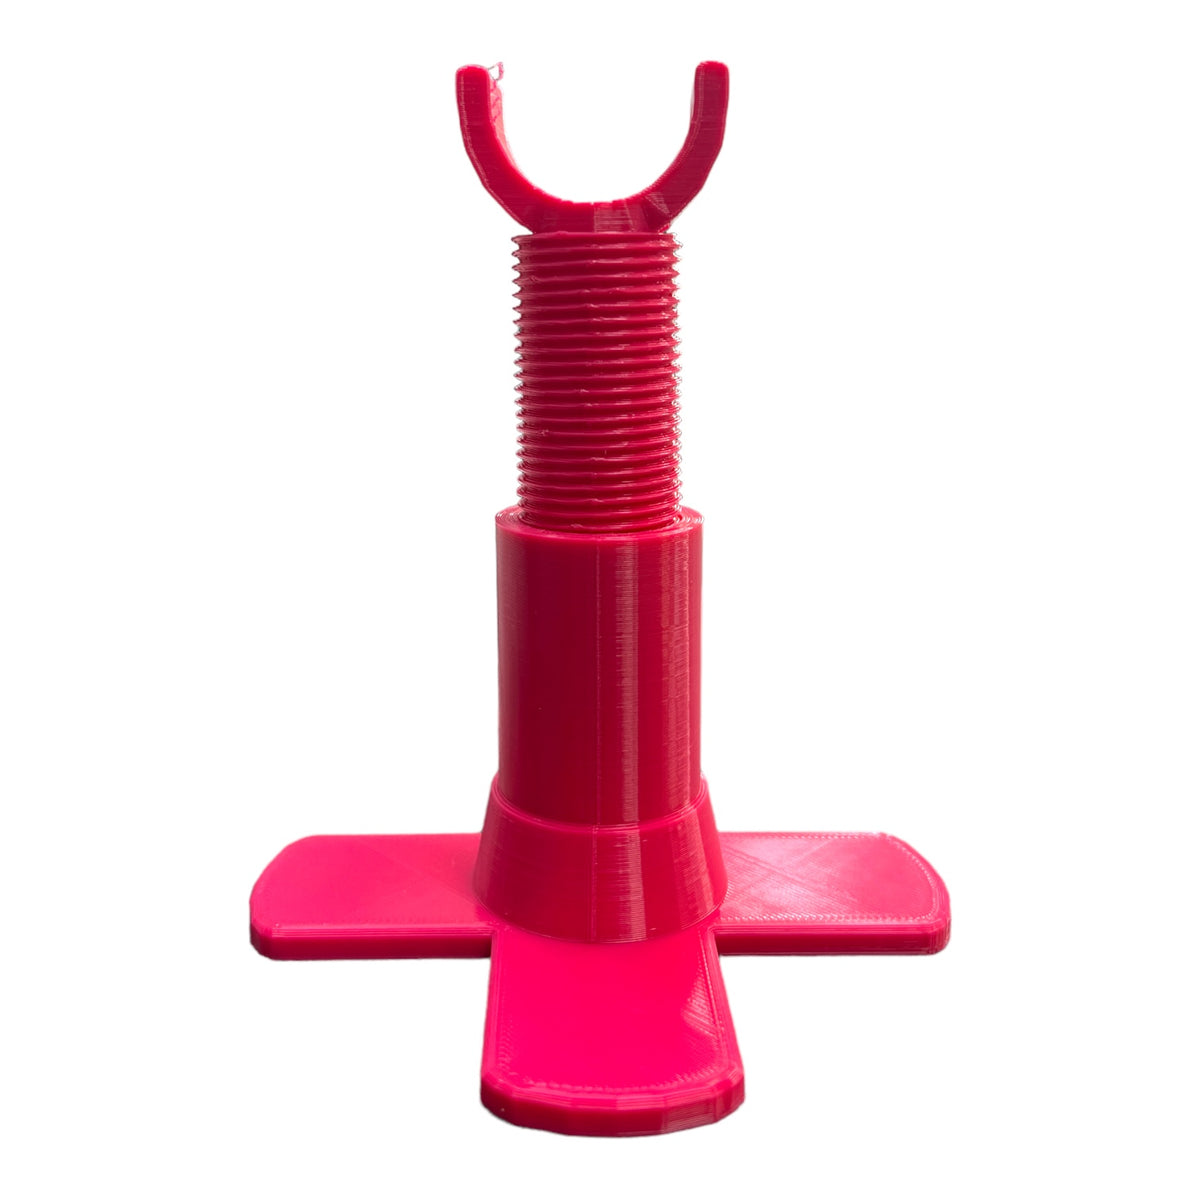 Adjustable Support Stand For Tumbler Making